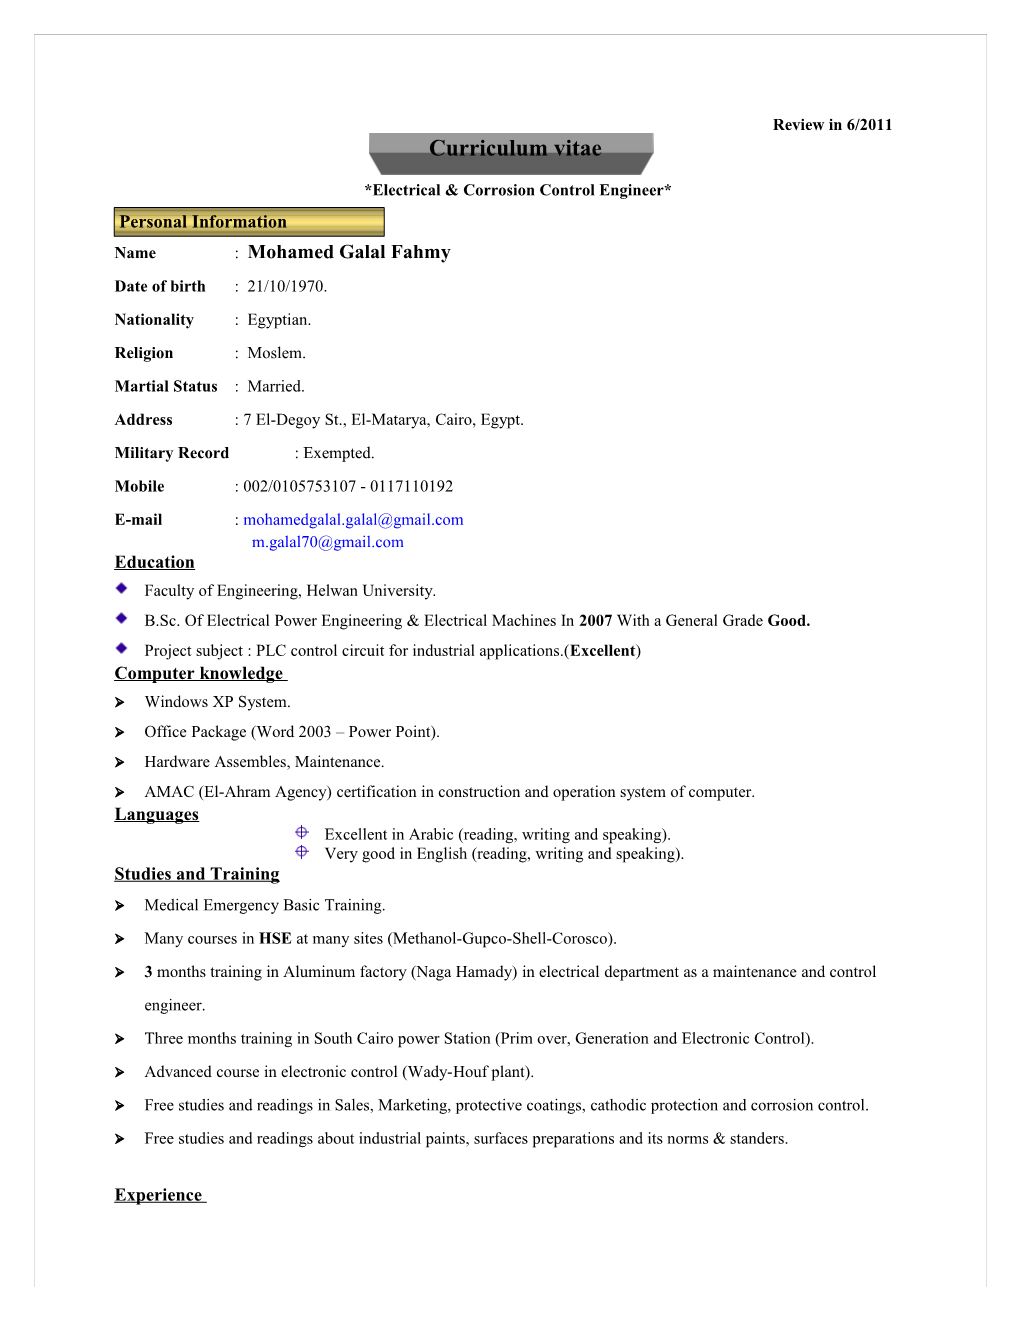 *Electrical & Corrosion Control Engineer*